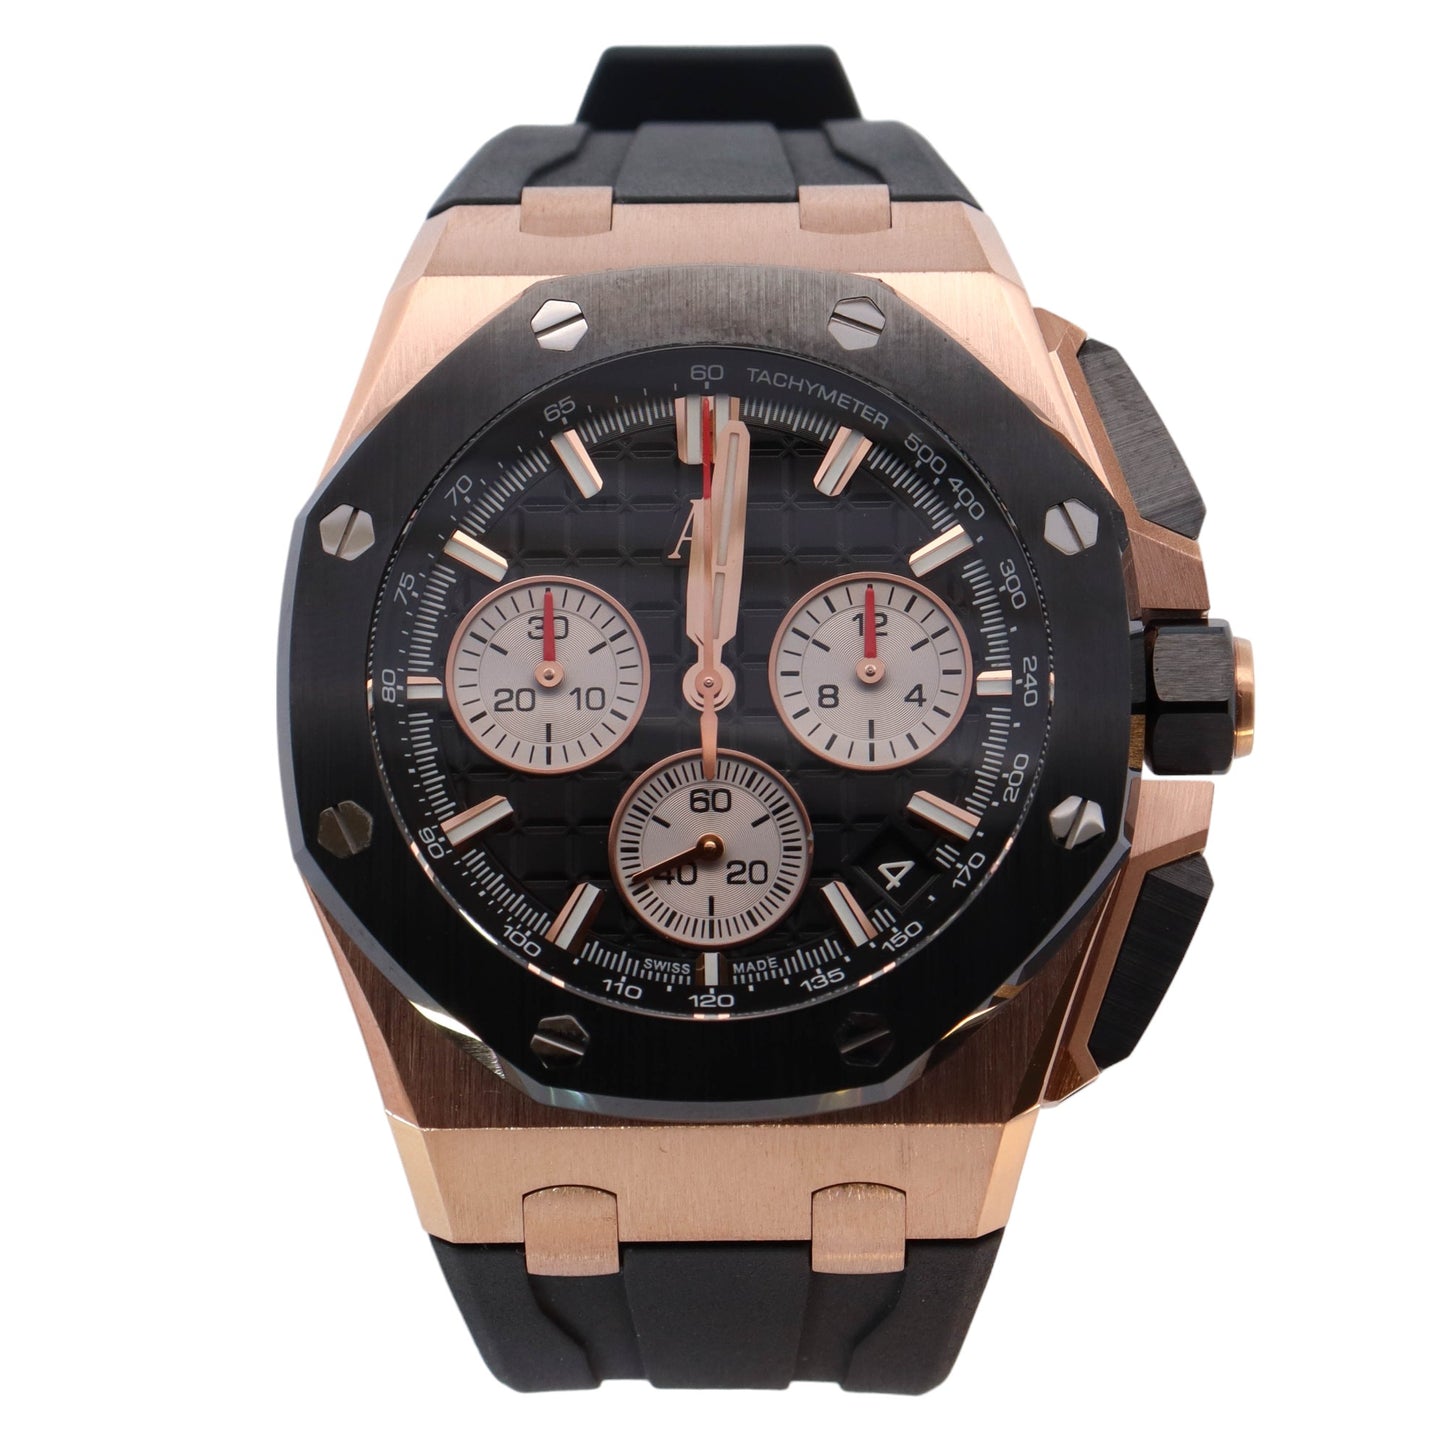 Audemars Piguet Royal Oak Offshore Rose Gold 43mm Black Chronograph Dial Watch Reference# 26420RO.OO.A002CA.01 - Happy Jewelers Fine Jewelry Lifetime Warranty